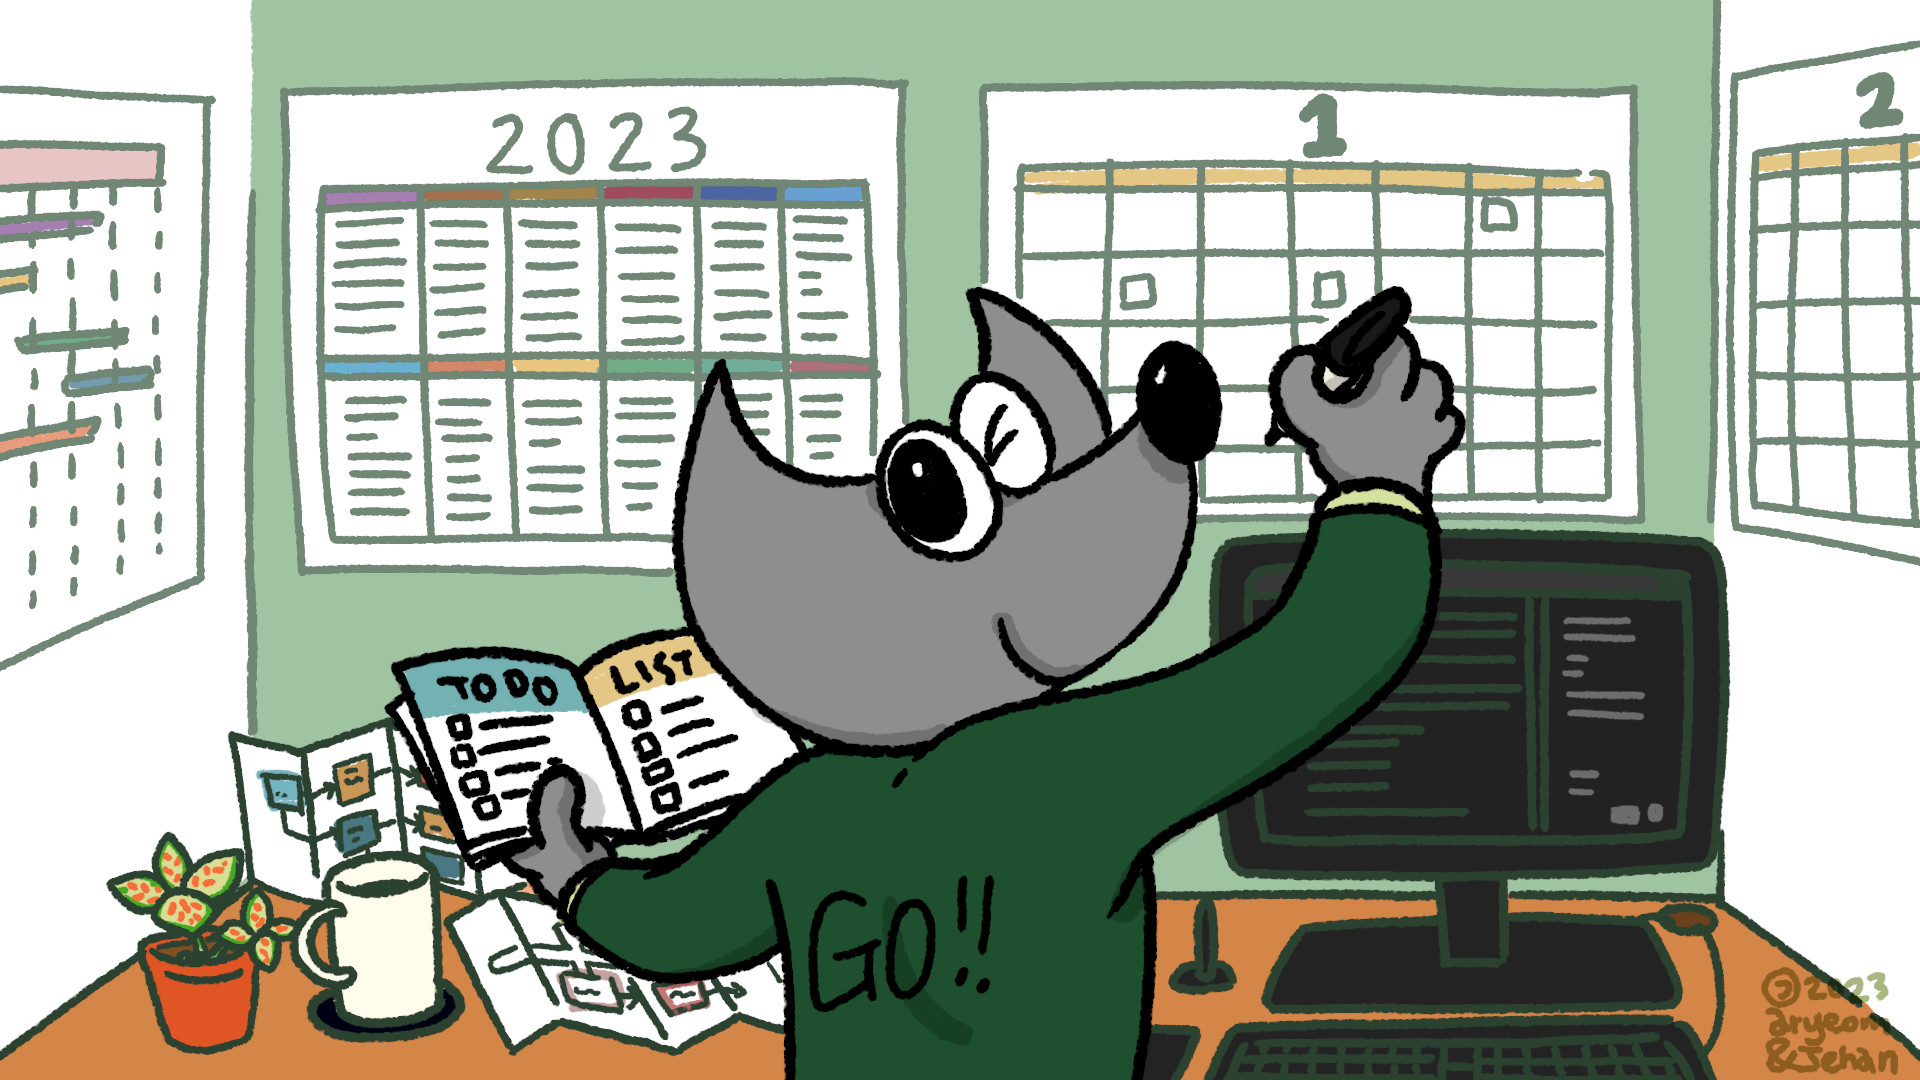 Go 2023 - Wilber and co. comics strip by Aryeom